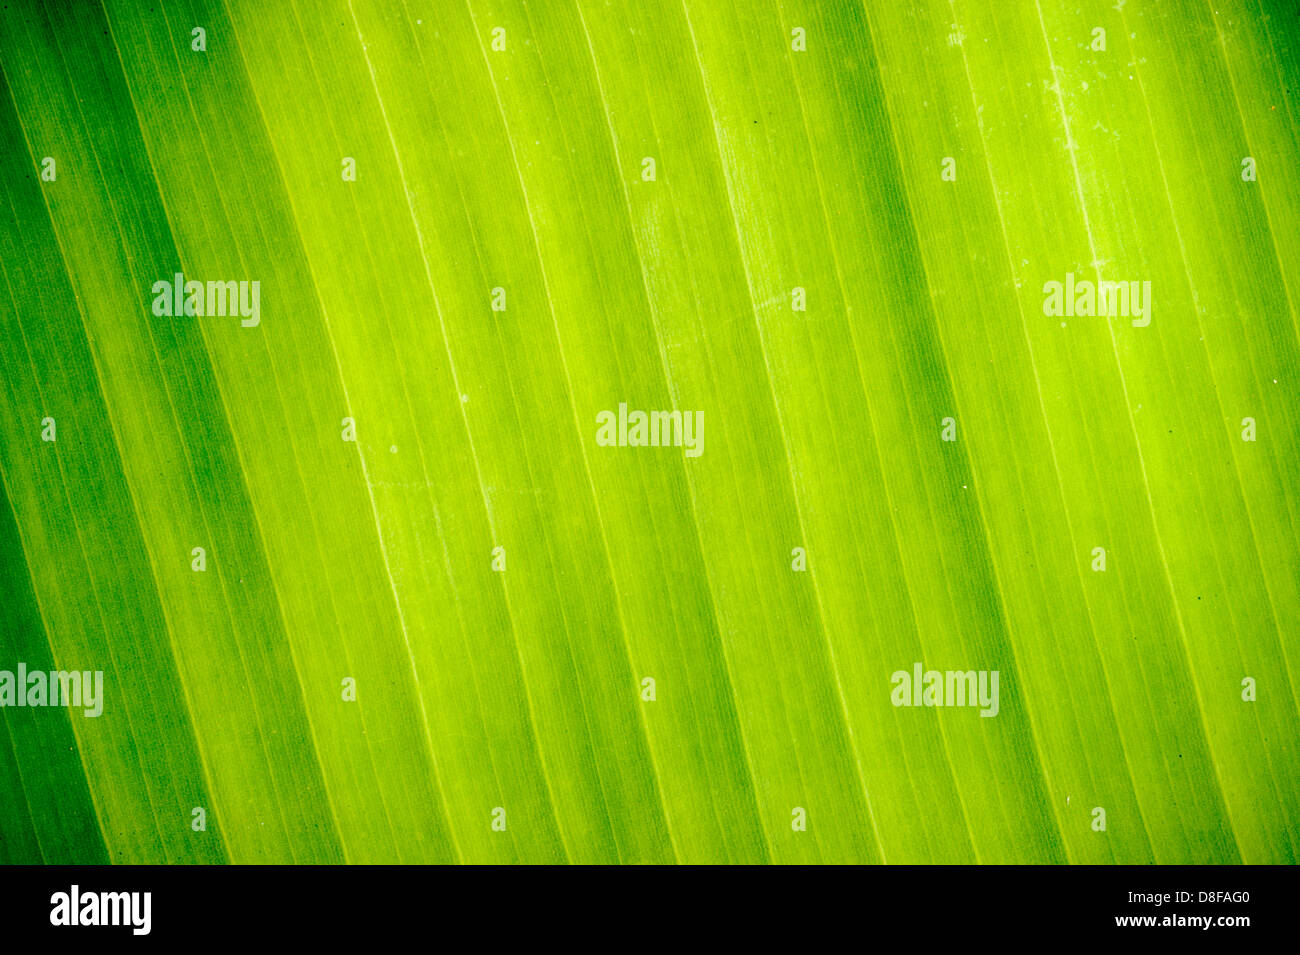 Abstract Banana leaves in background. Stock Photo